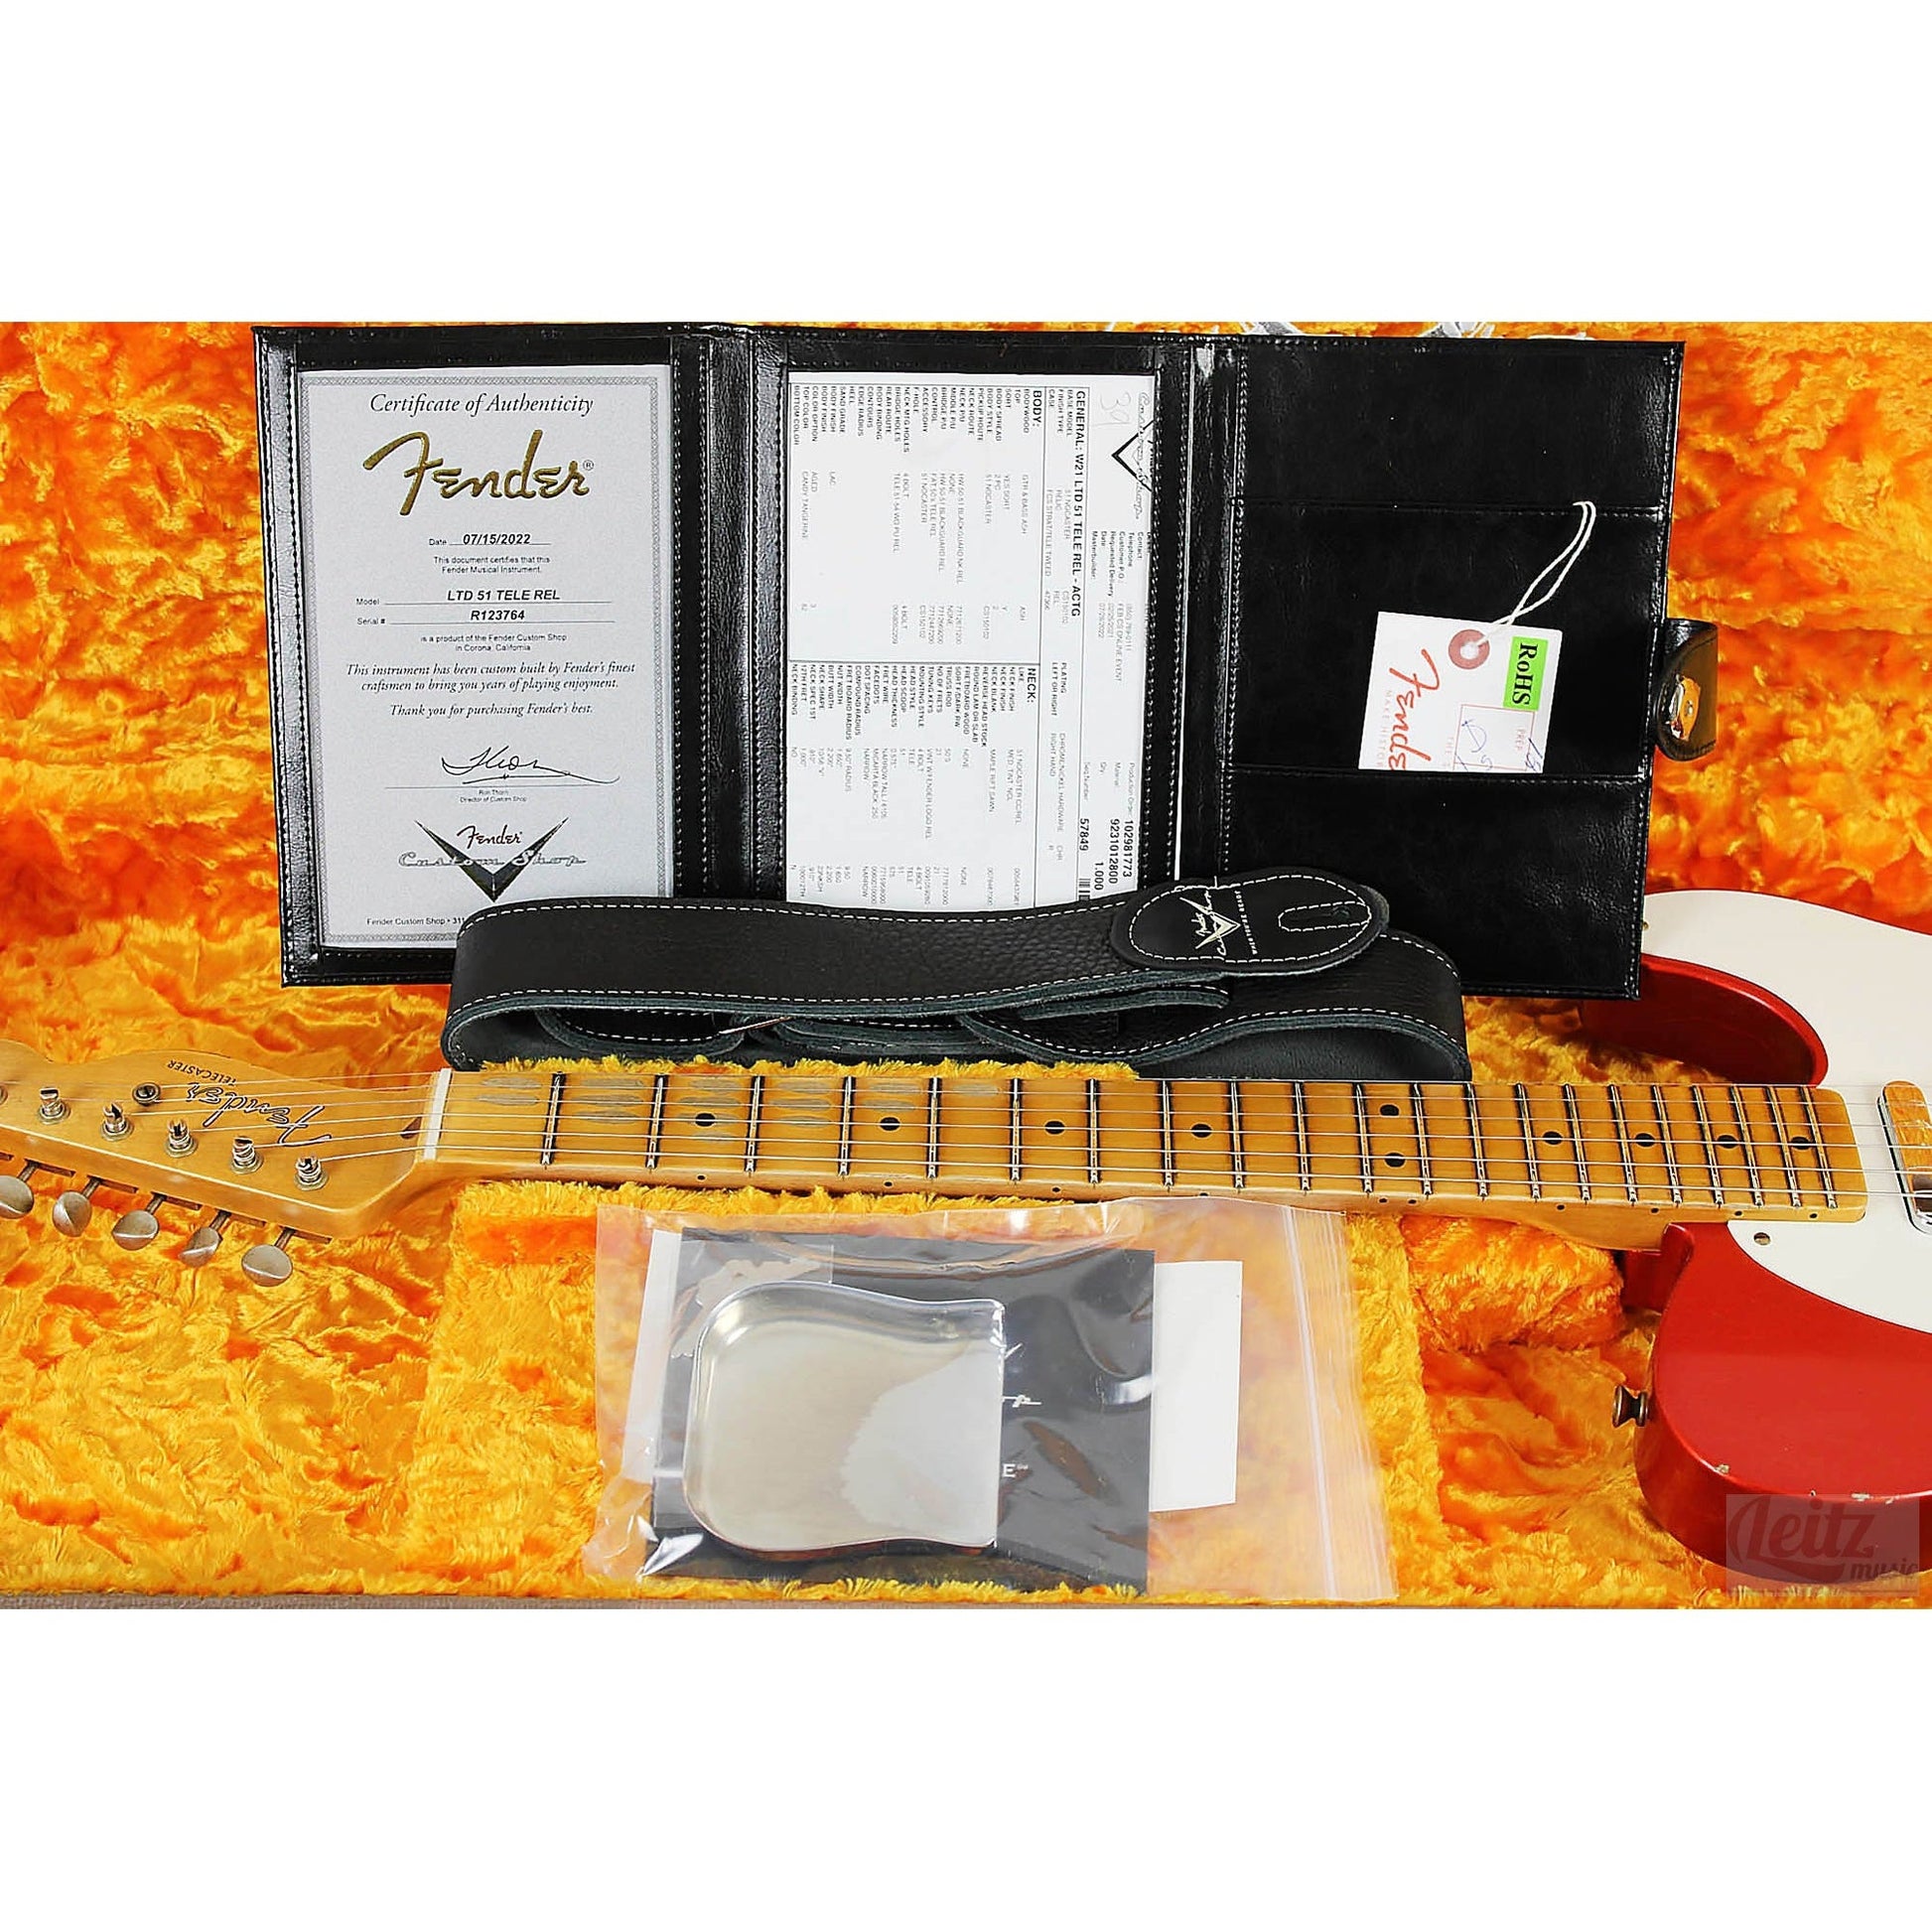 Fender Custom Shop Limited Edition 51 Telecaster Relic - Aged Candy Tangerine - Leitz Music--R123764